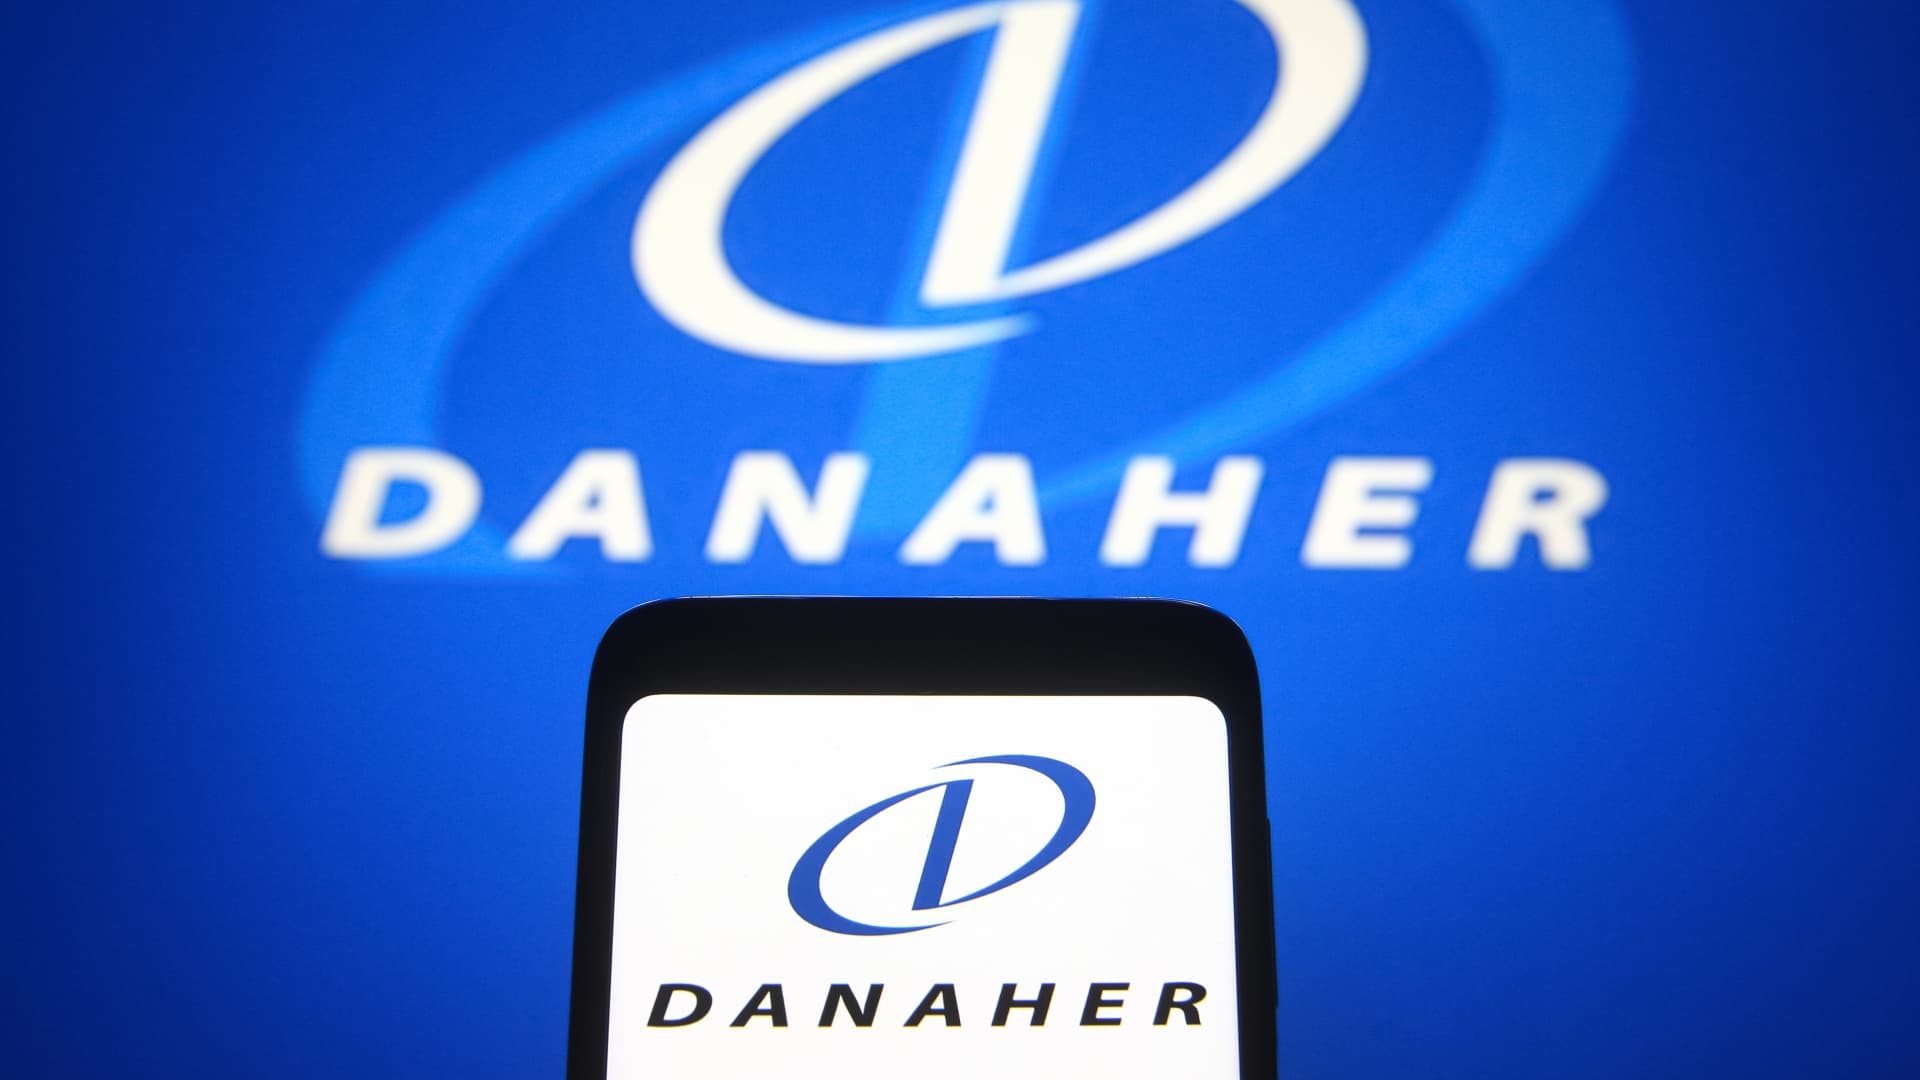 Jim Cramer says to purchase shares of Danaher on the dip